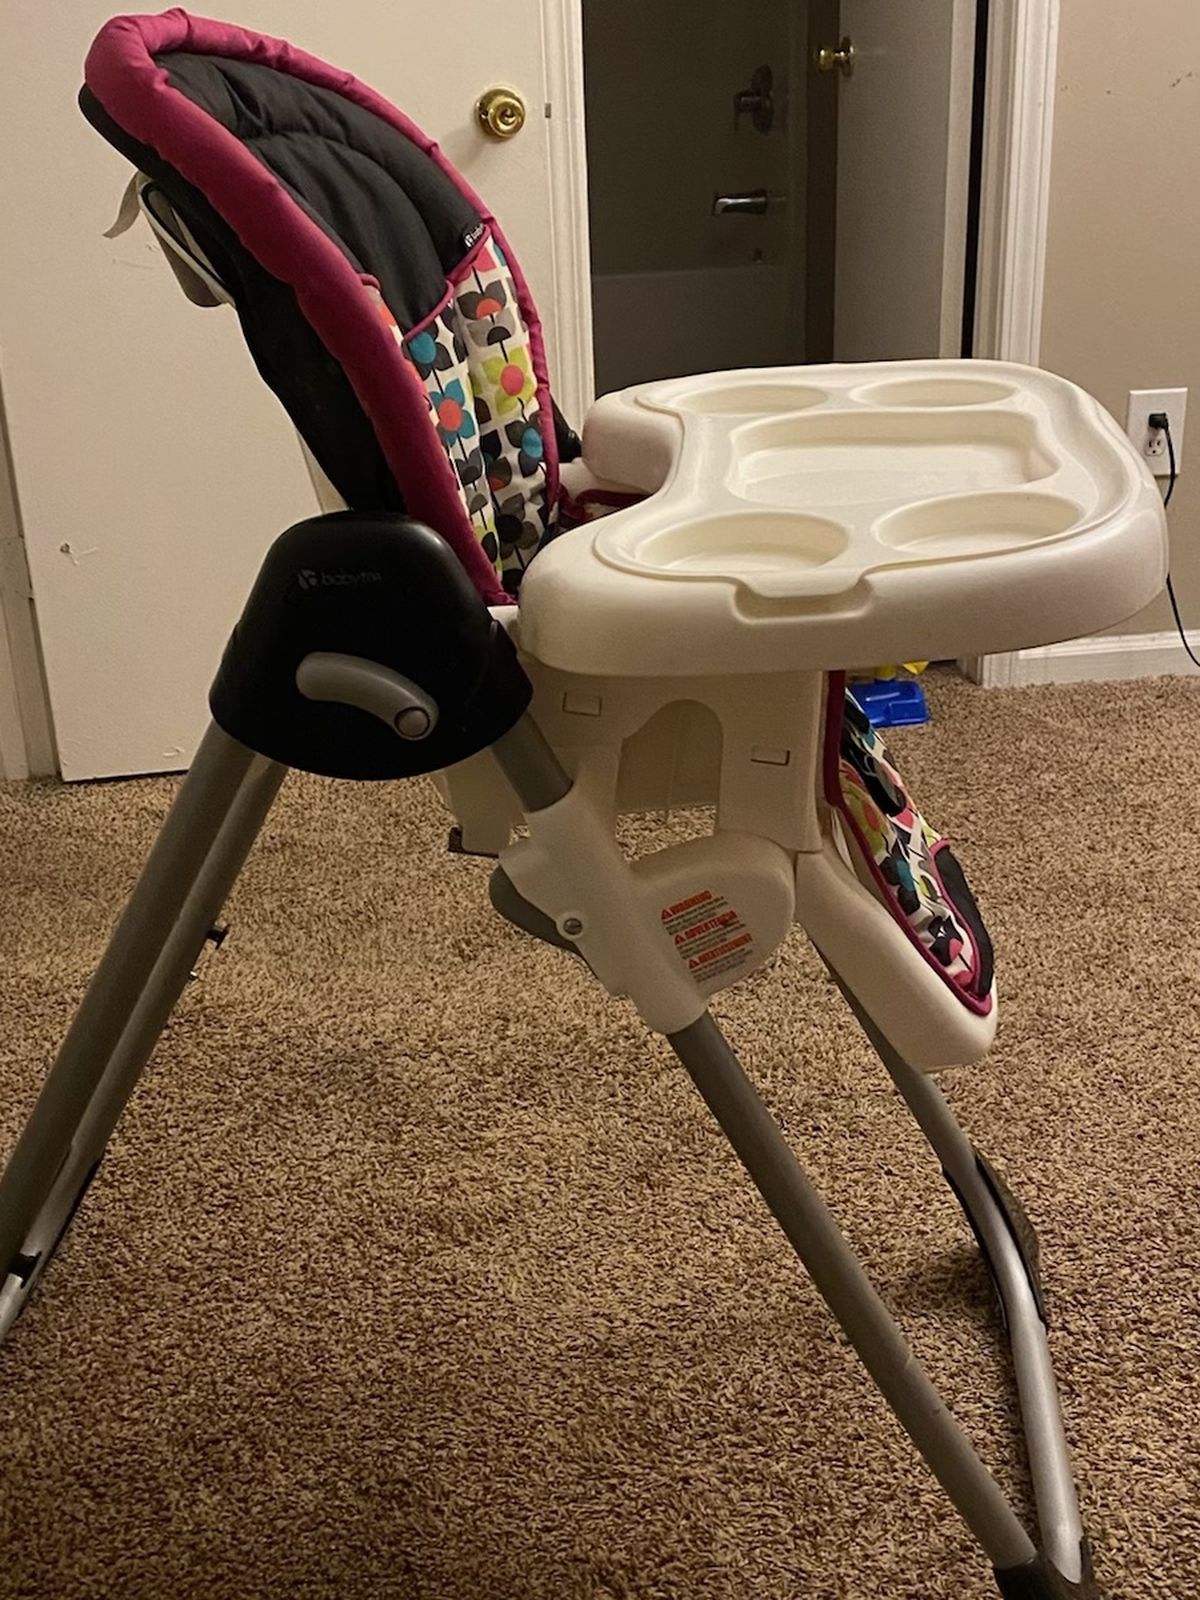 High Chair For Sale